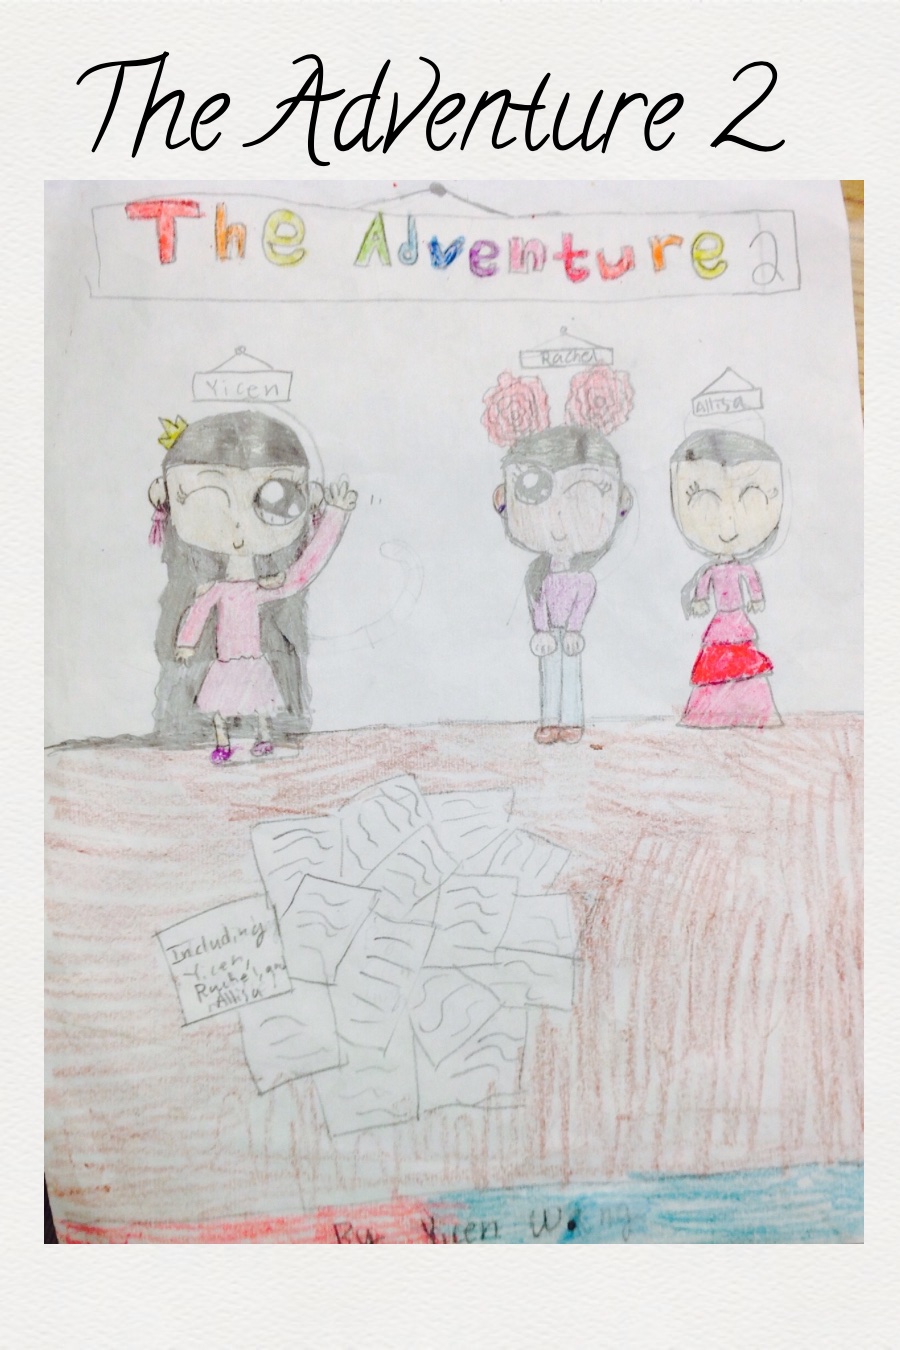 The Adventure 2 by Yicen W